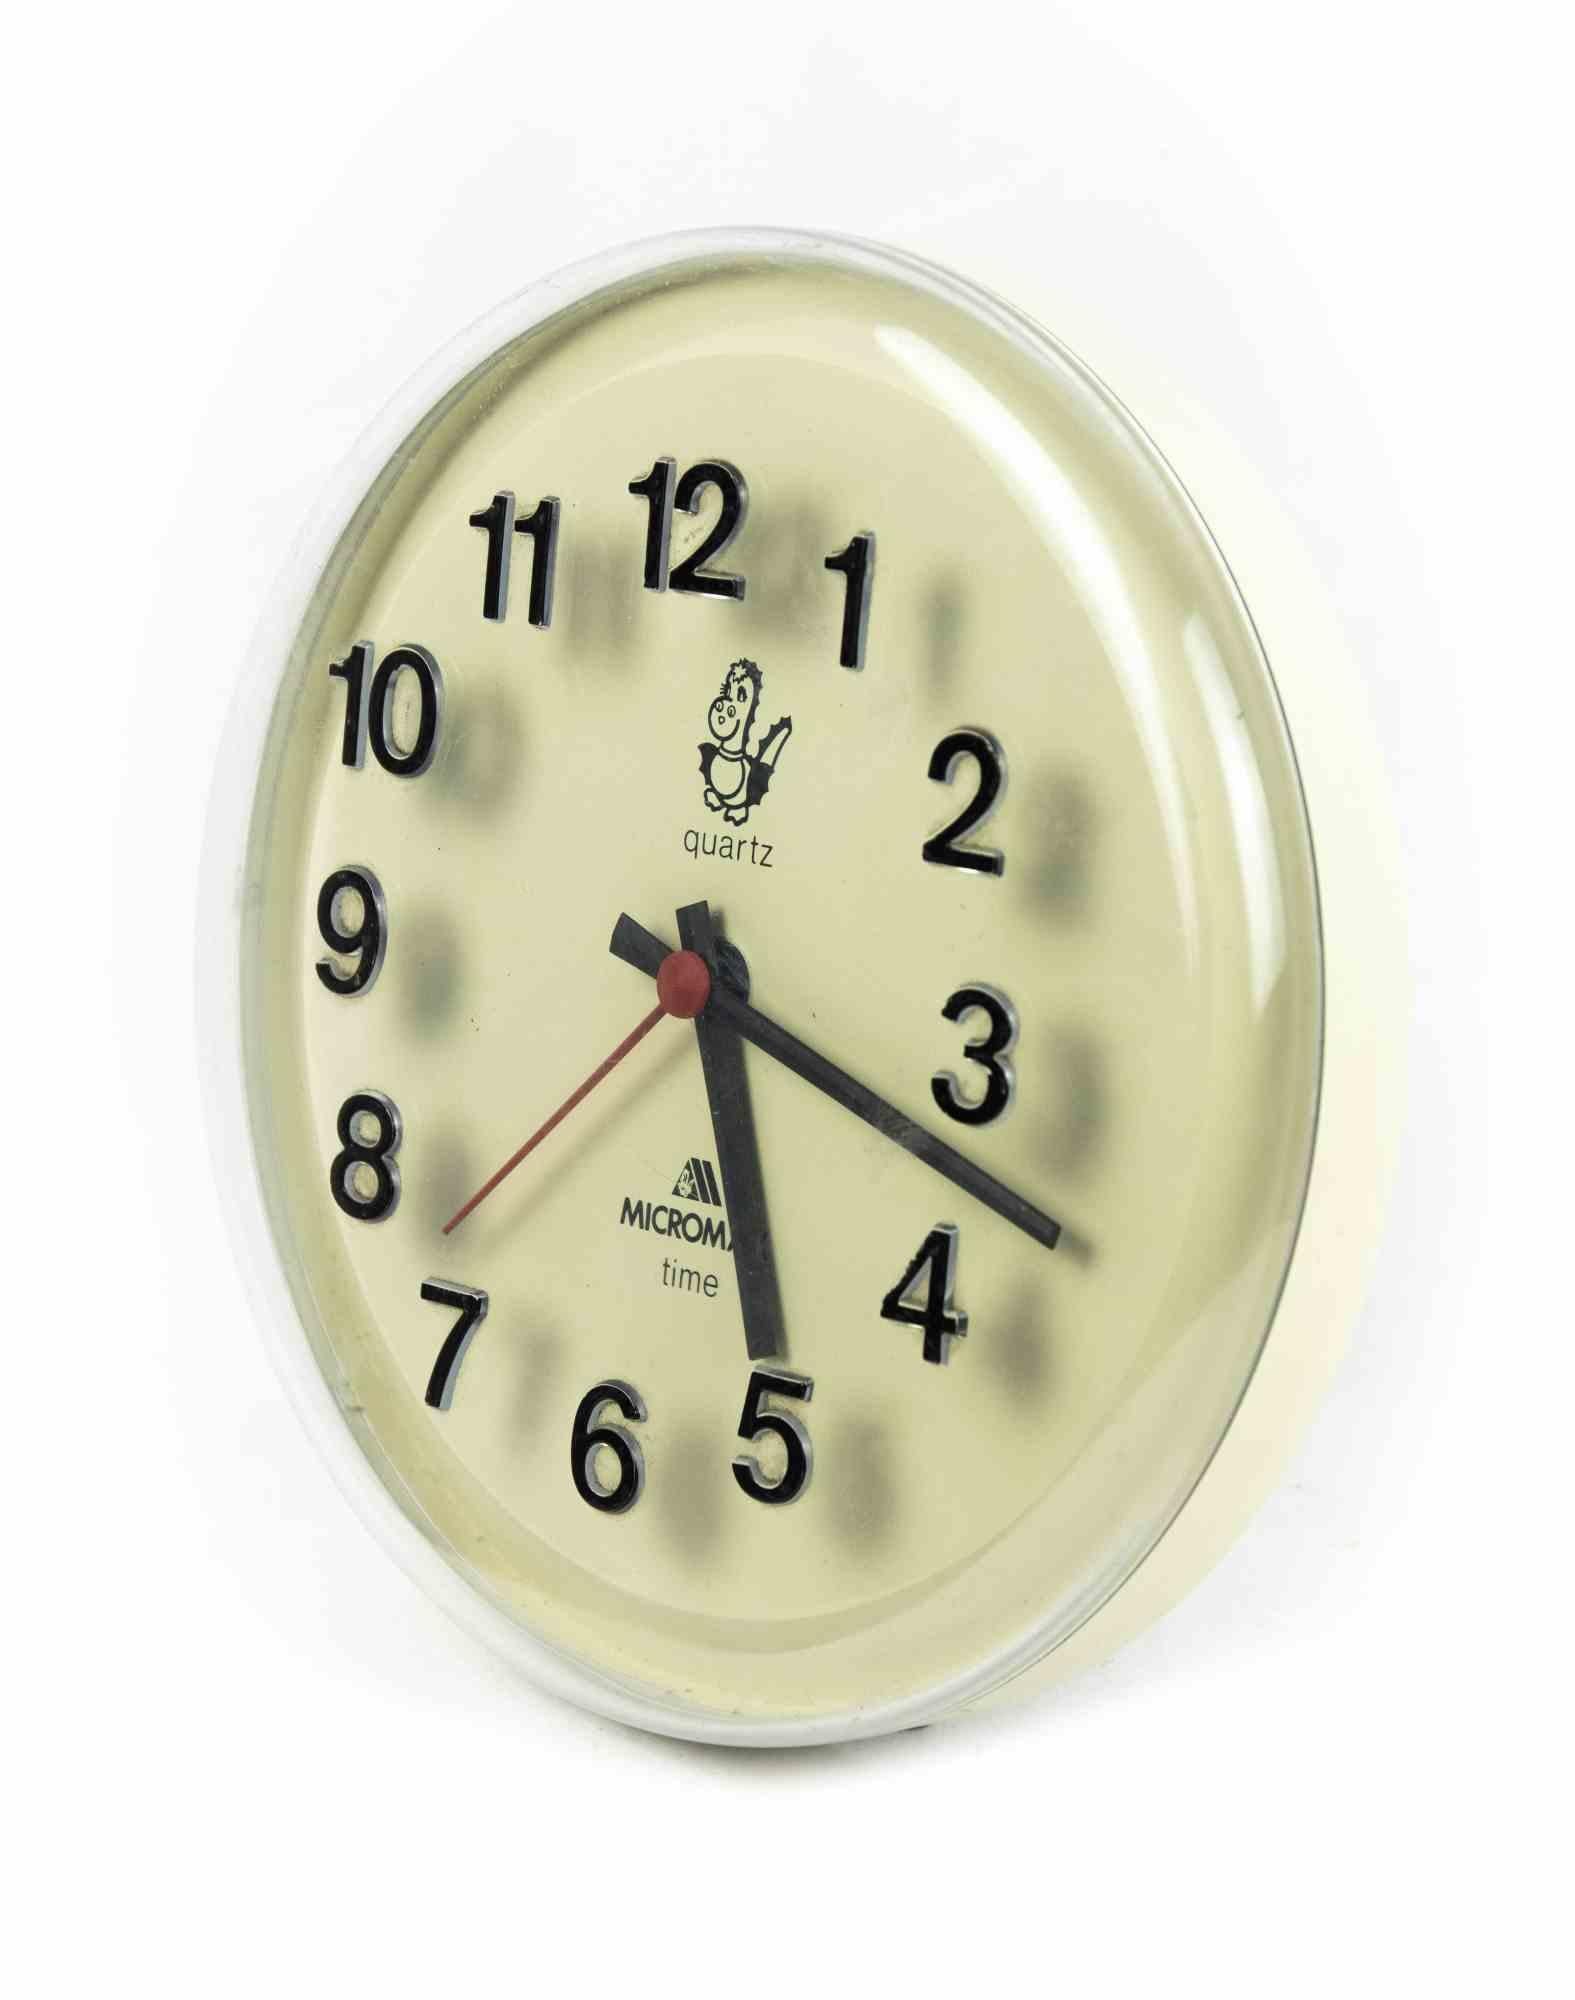 Microma Quartz Vintage Clock is a decorative object realized in the 1980s by Microma Quartz 

A vintage clock white colored.

The perfect gift for a jump to the past.

Not in a perfect condition due to the time.